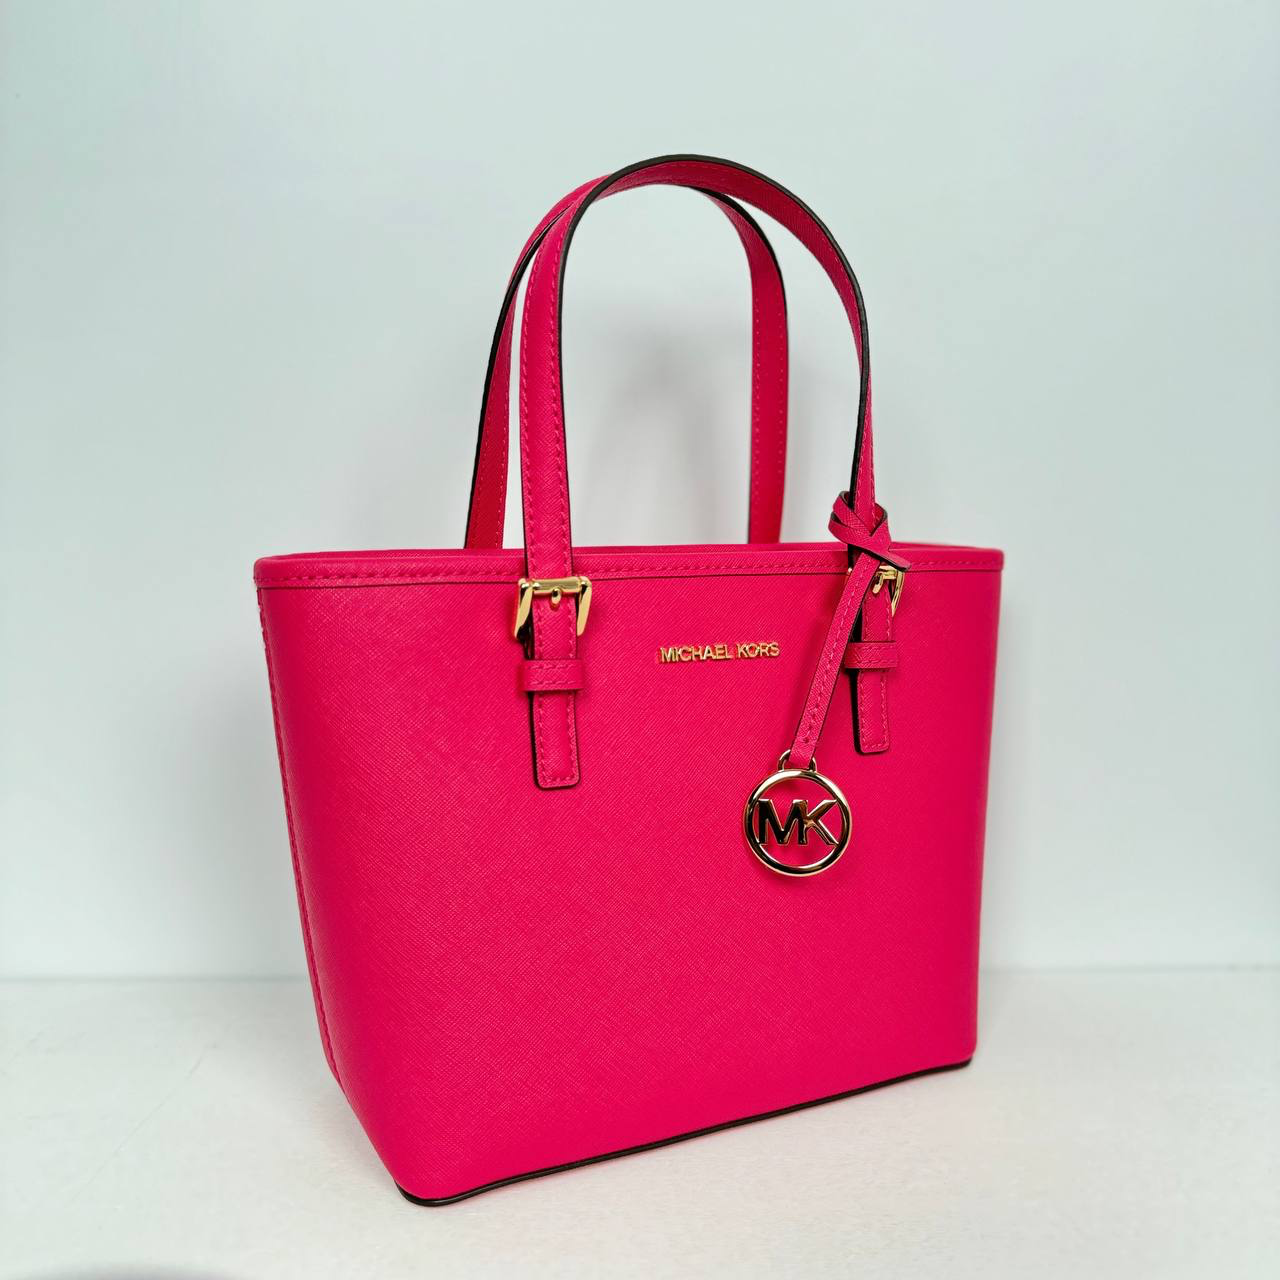 MK Jet Set Travel Extra-Small Carryall Convertible TZ Tote in Electric Pink (35T9GTVT0L)